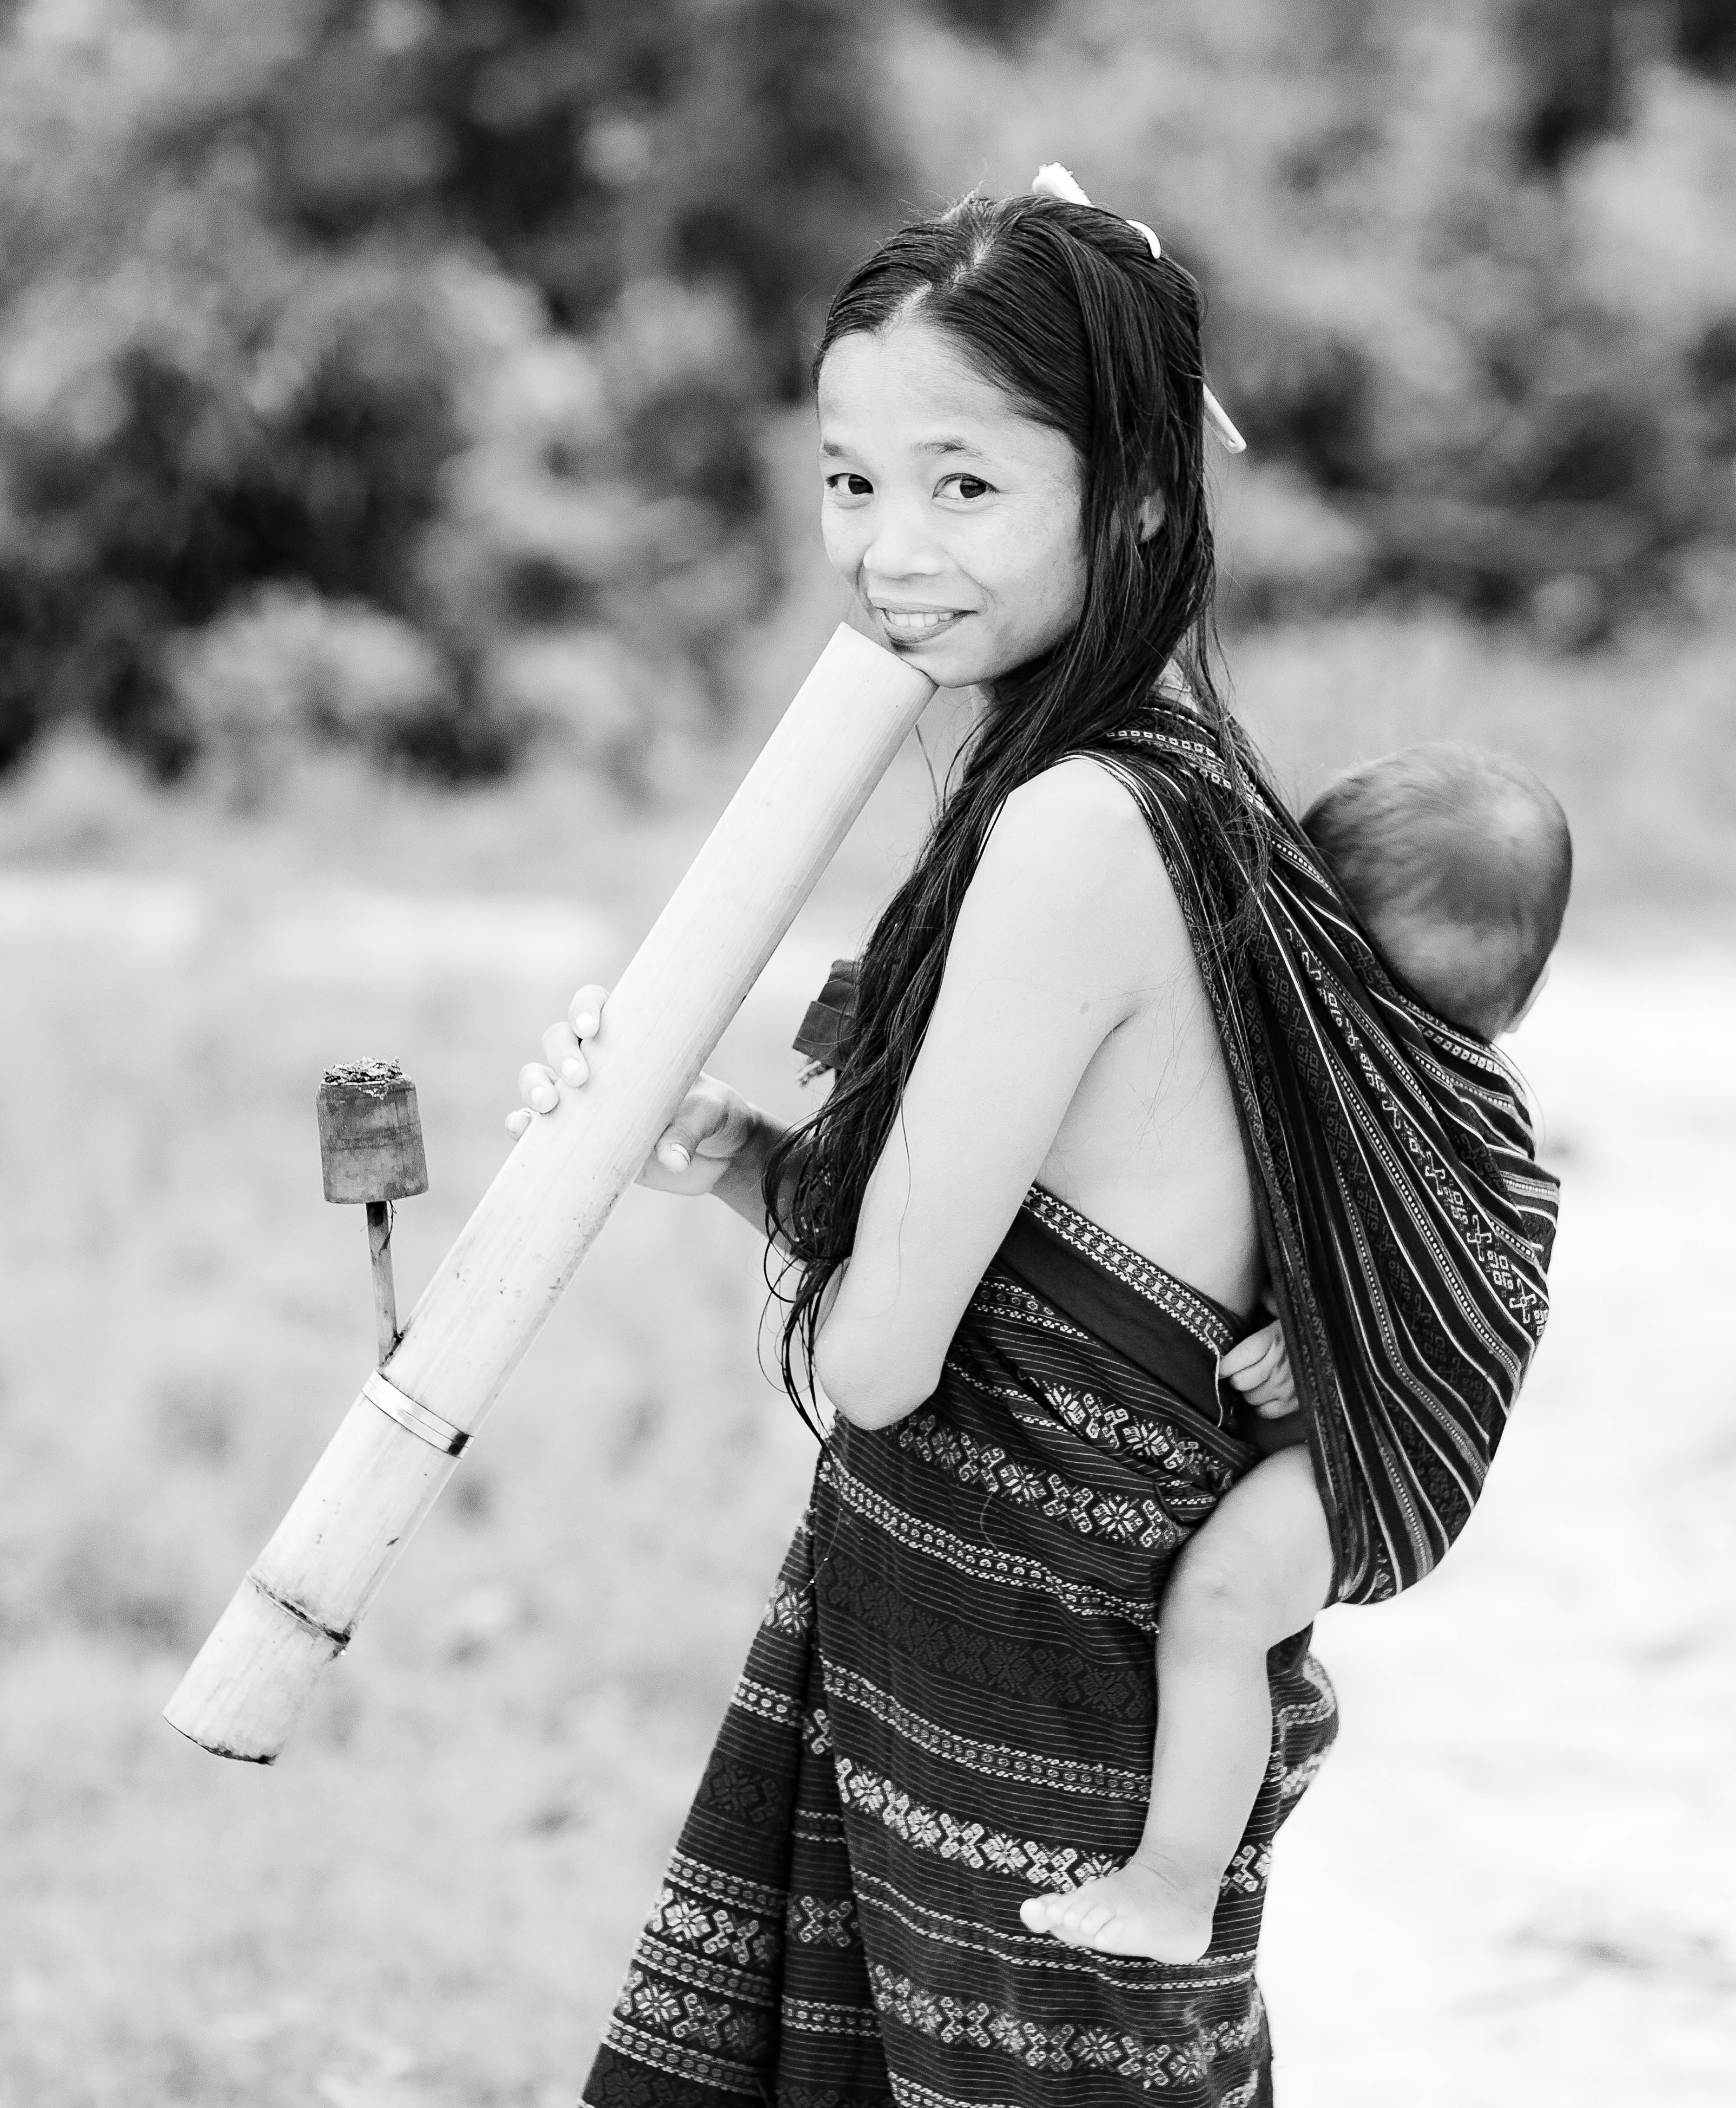 Laos, Xekong Prov, Woman With Pipe And Child, 2011, IMG 3967BW